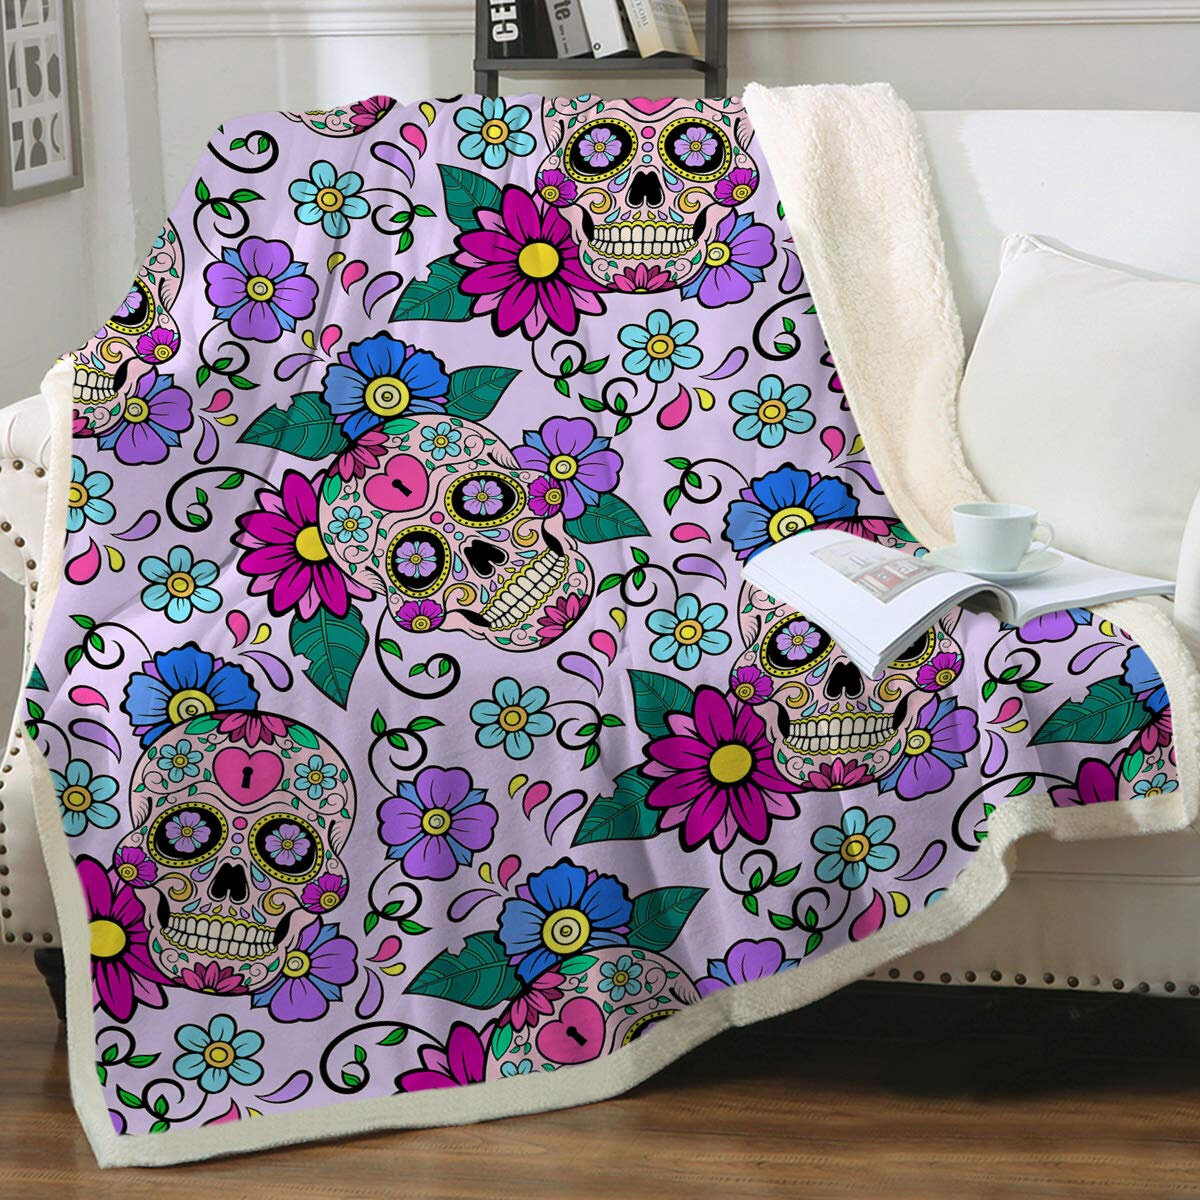 50x60 Inches Sofa Soft Flannel Fuzzy Blanket Wing Sugar Skull Fleece Throw Blankets Bed Throw Blanket for Couch Warm Blankets for Winter 